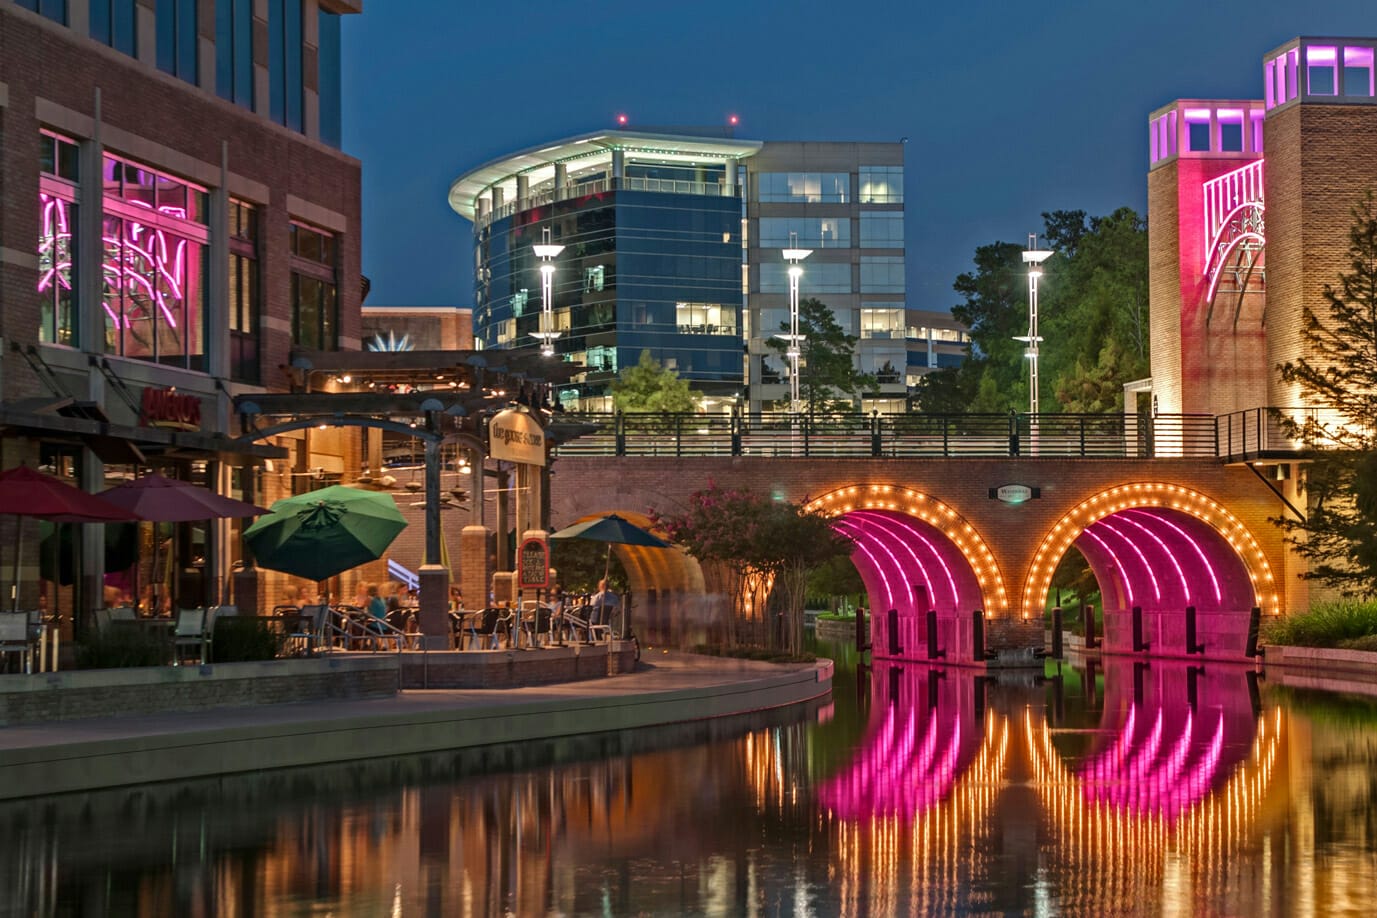 Waterways Illuminated with Pink Neon at The Woodlands